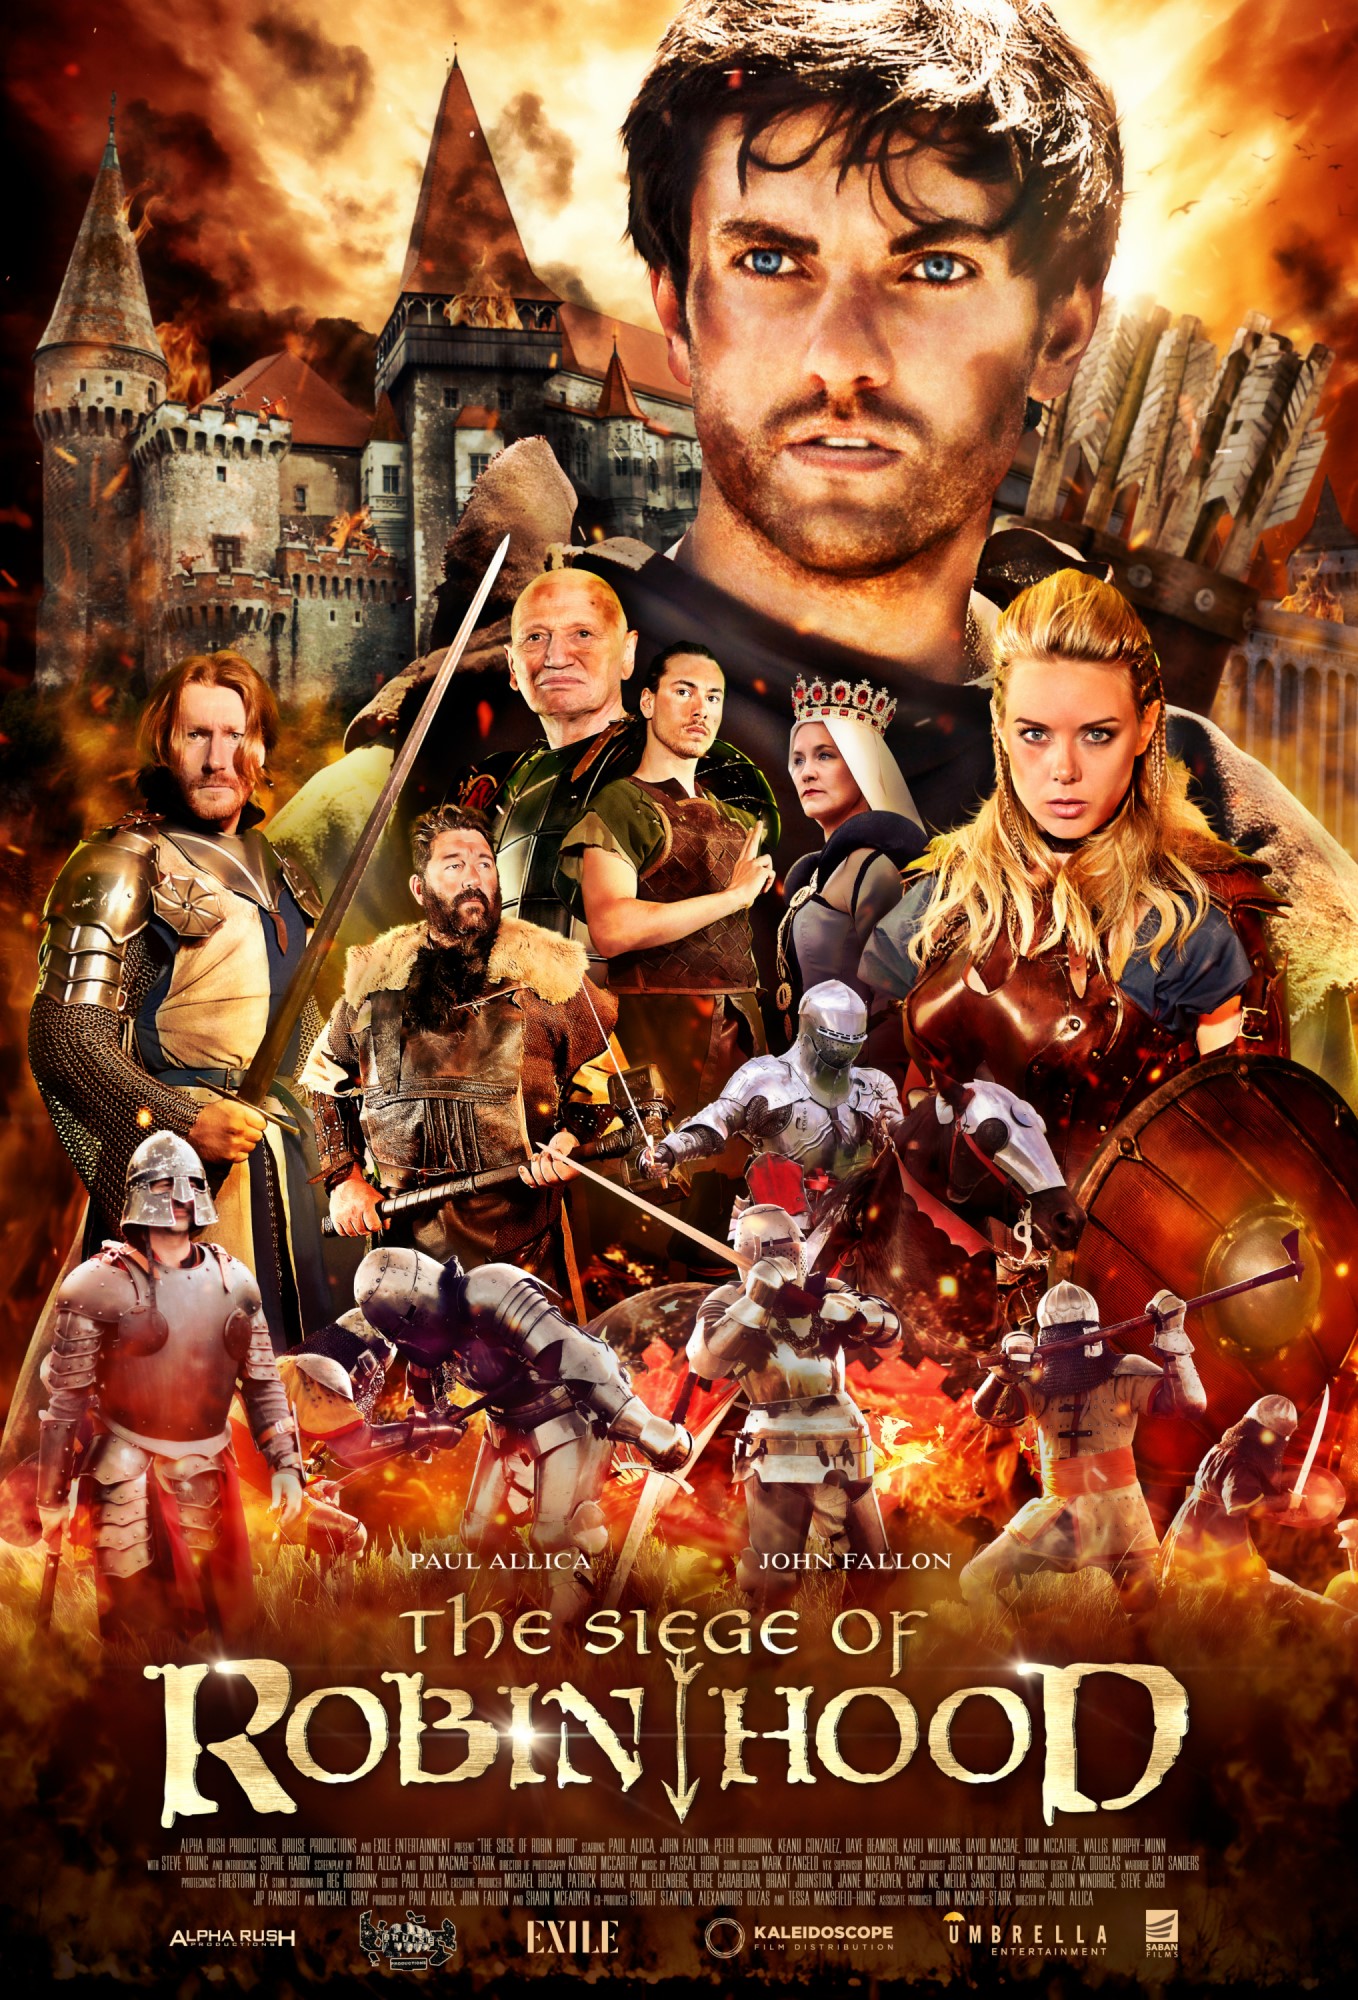 The Siege of Robin Hood Trailer & Poster 2